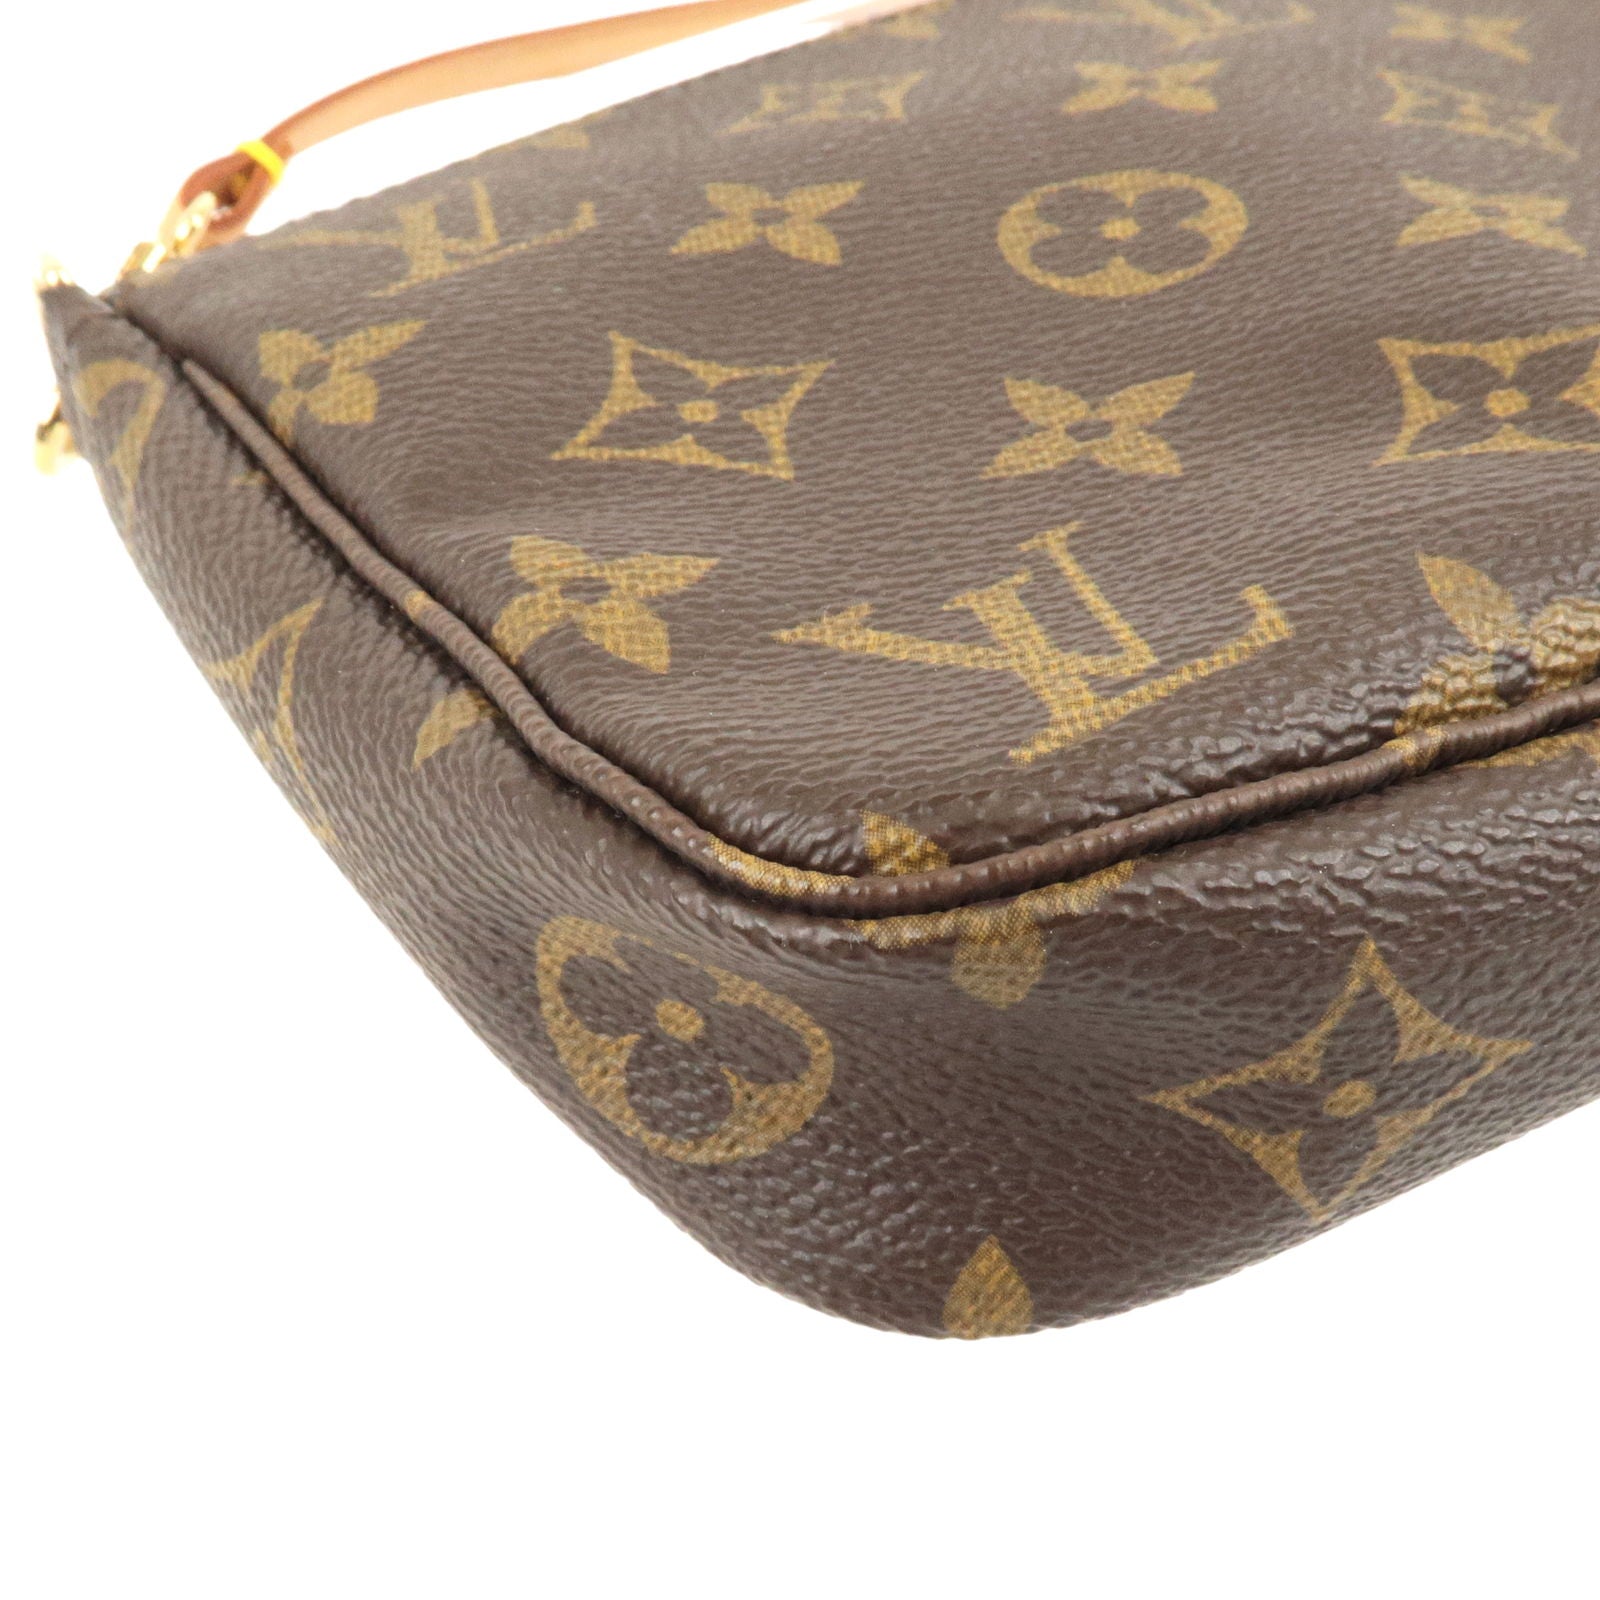 Pre Owned  Louis Vuitton 2006 pre-owned monogram Pochette Cles